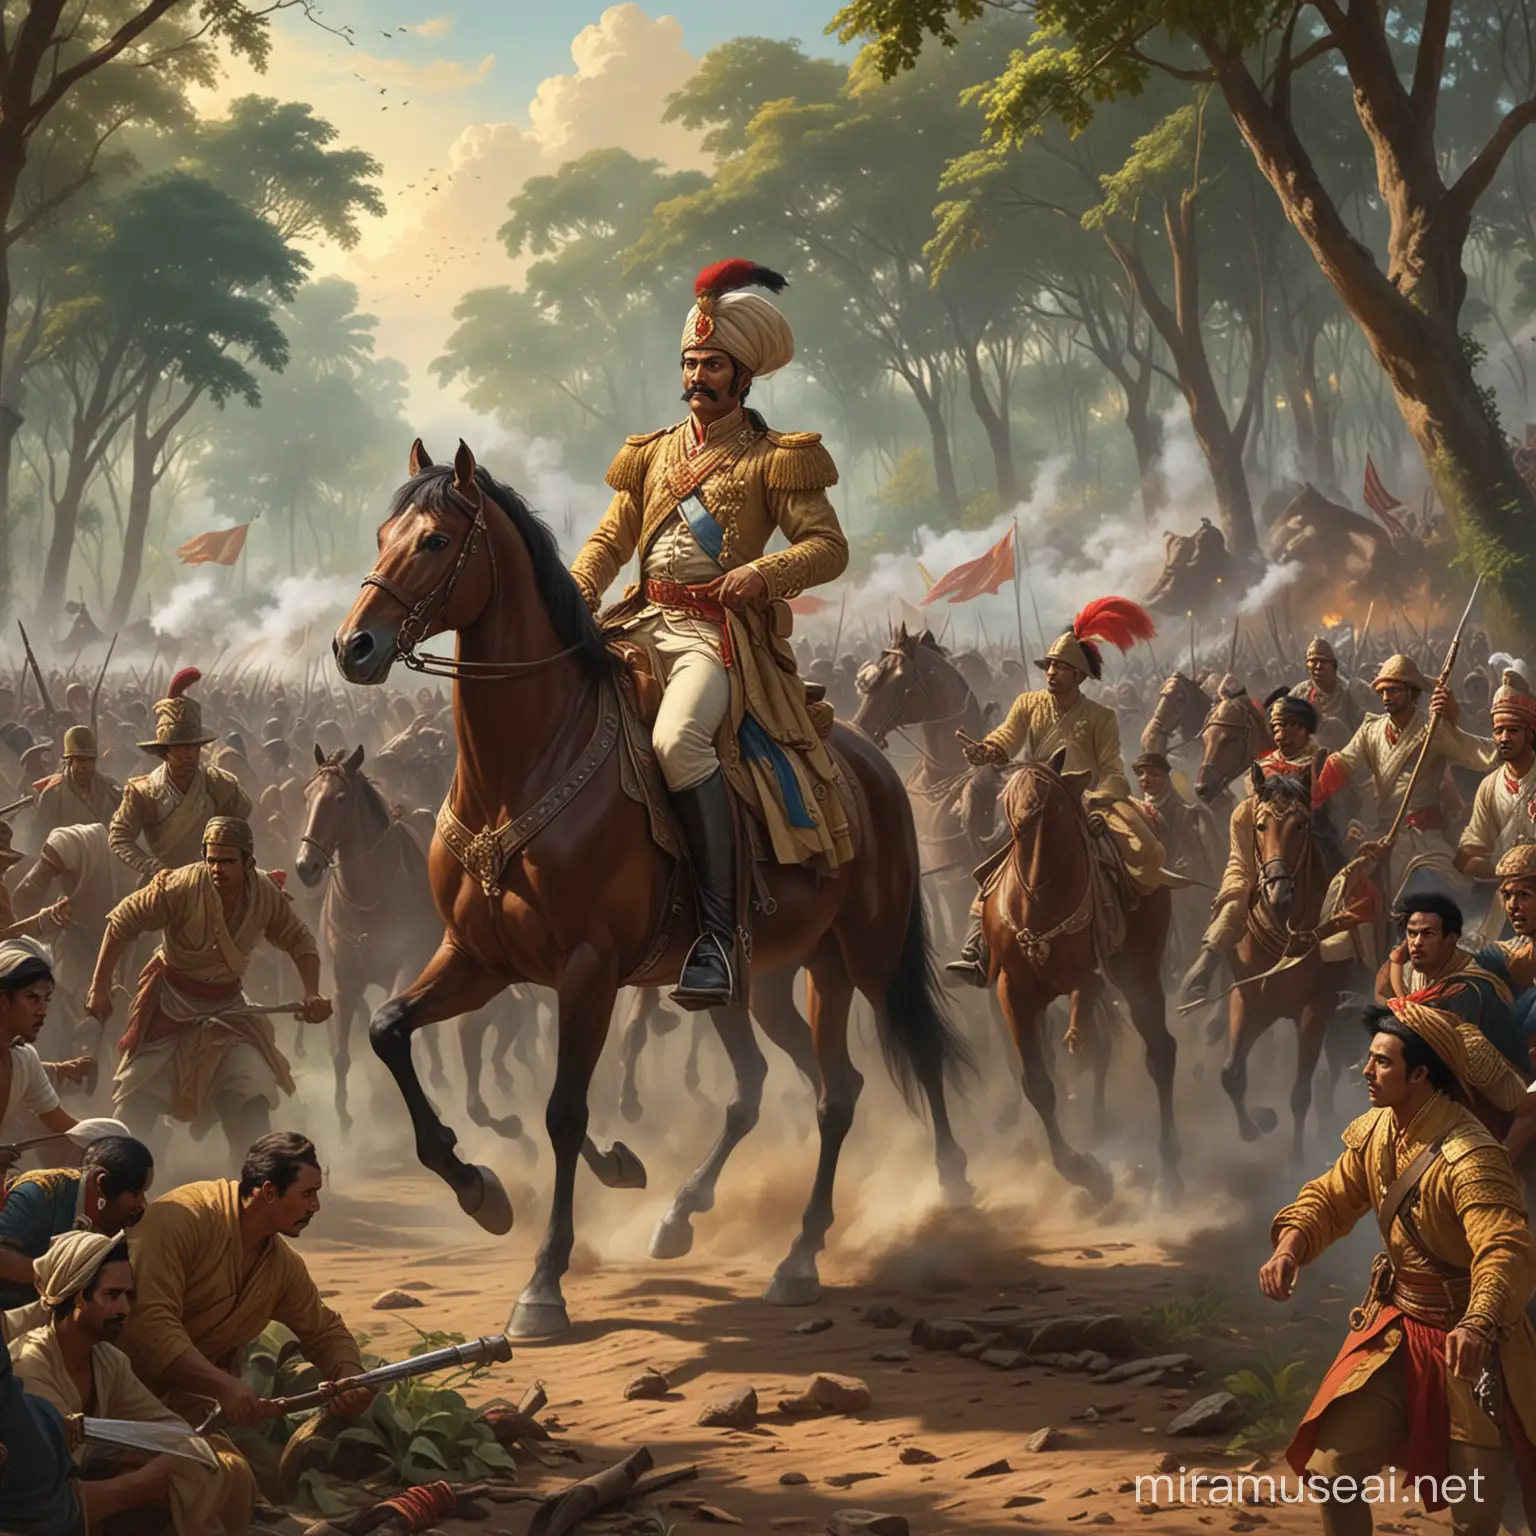 Triumphant Victory of Prince Diponegoro Against Colonial Invaders